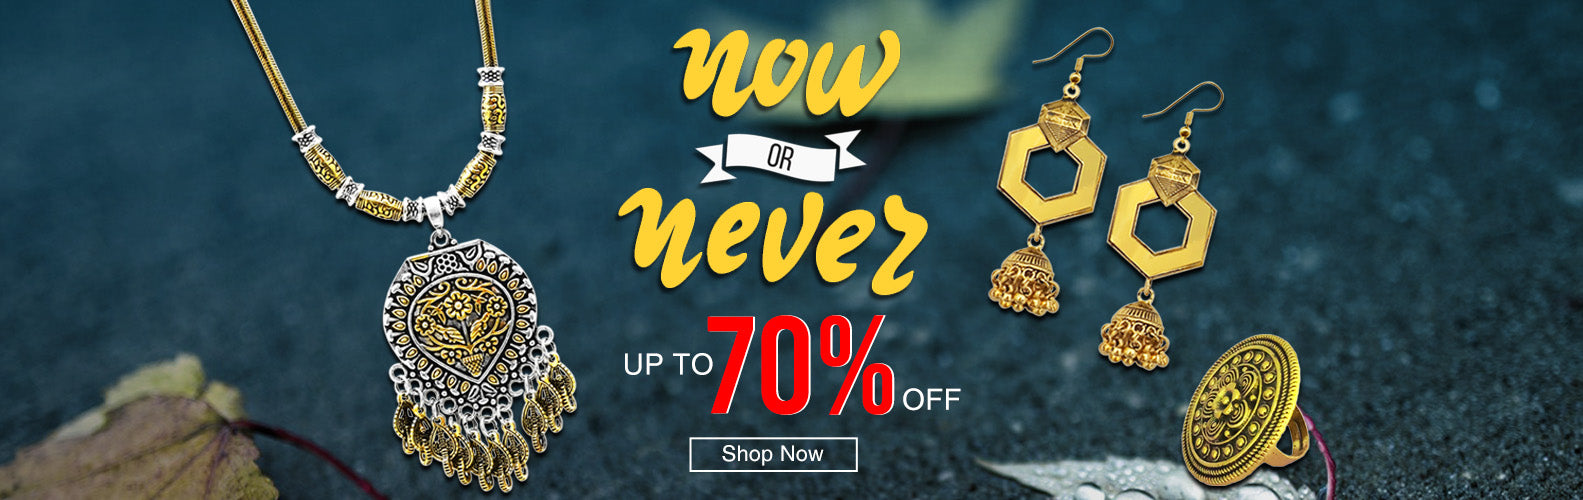 Now Or Never Sale